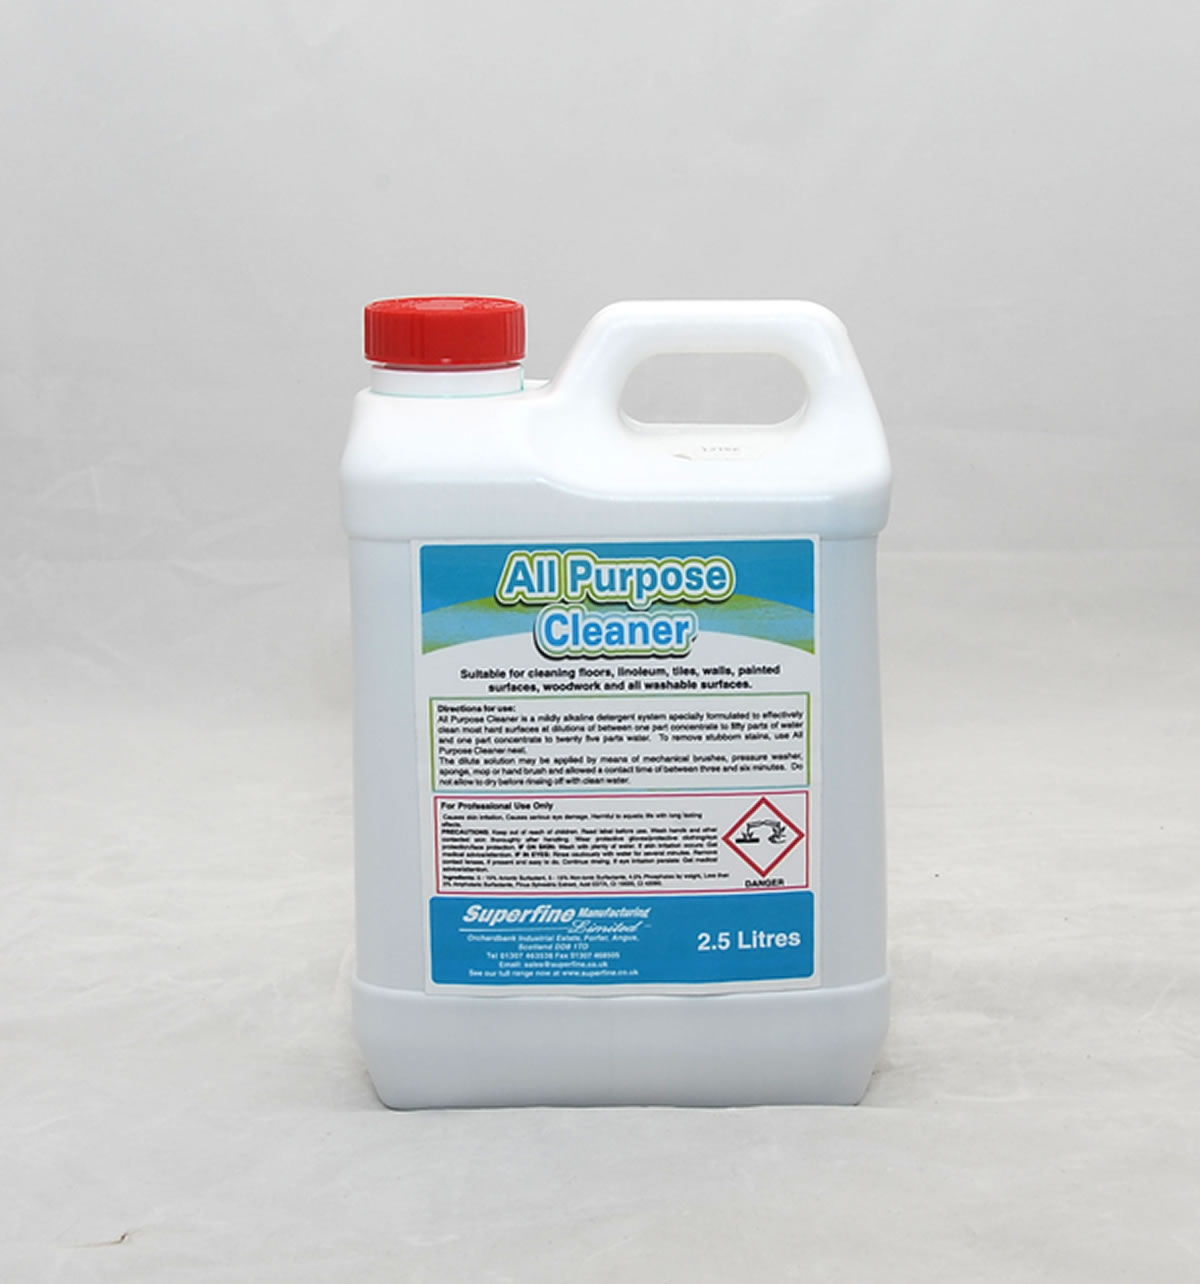 All Purpose Cleaner 12 x 1 Litre Cat: 7/79